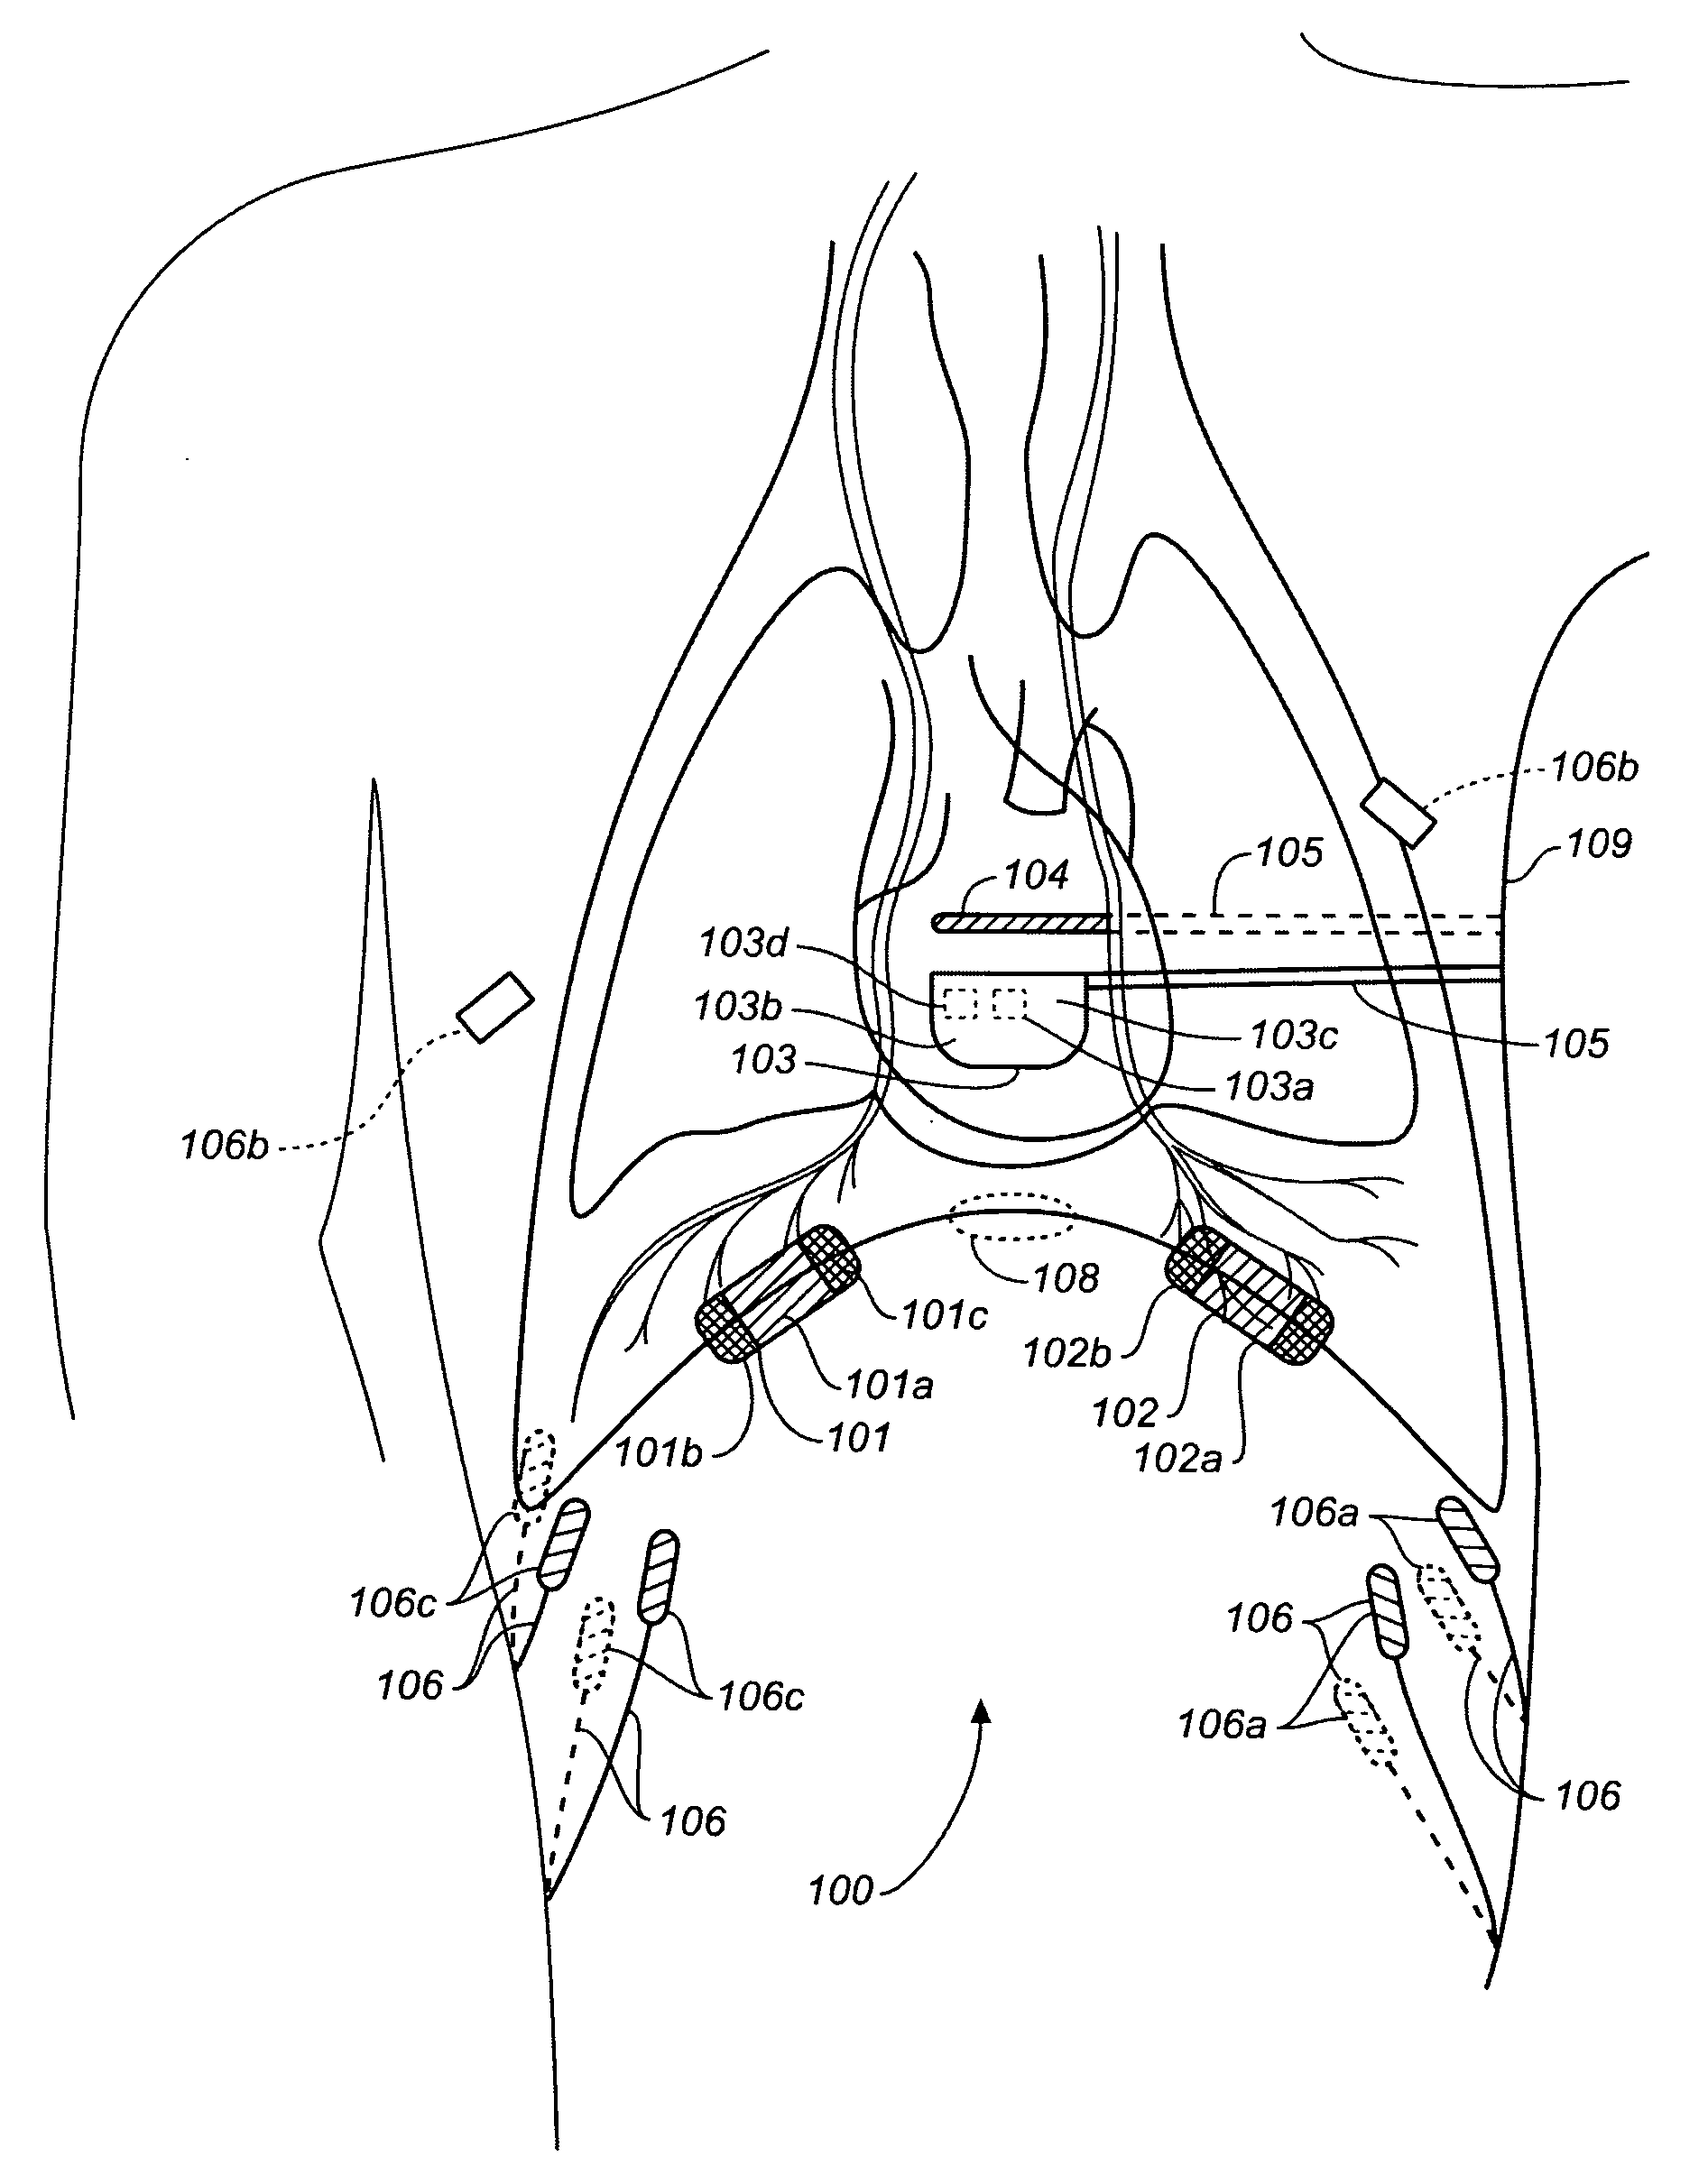 Subcutaneous diaphragm stimulation device and method for use